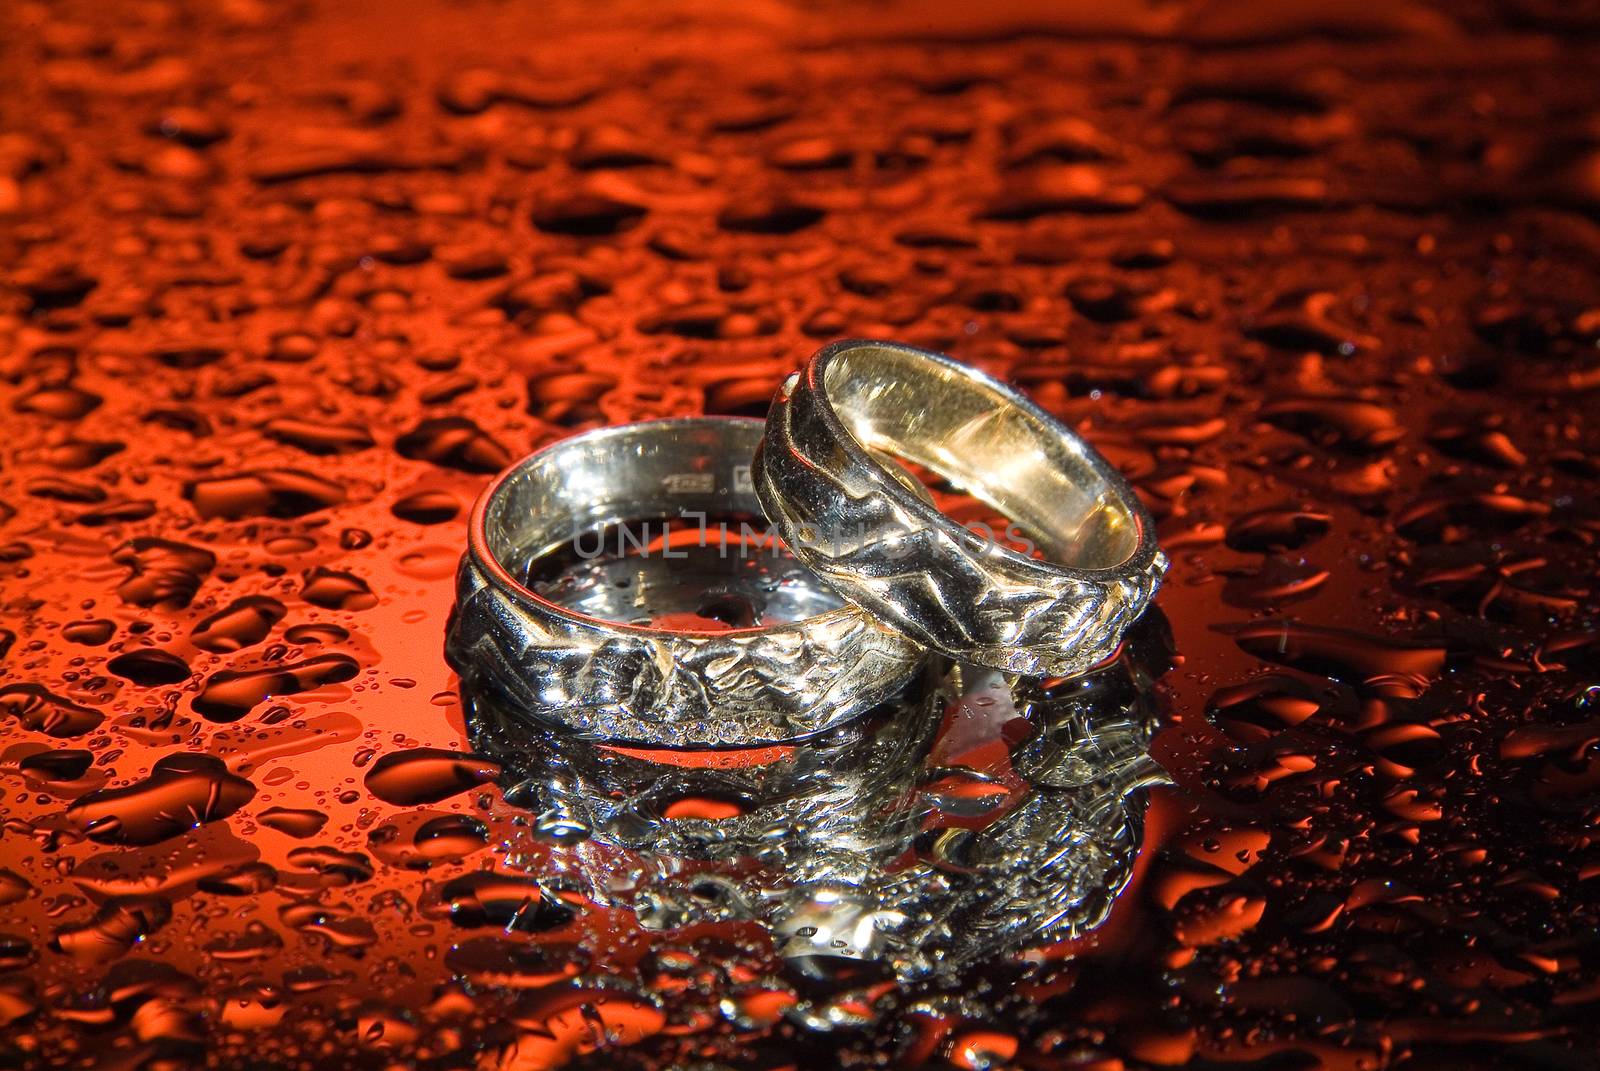 Wedding rings and rose petals on a studio background